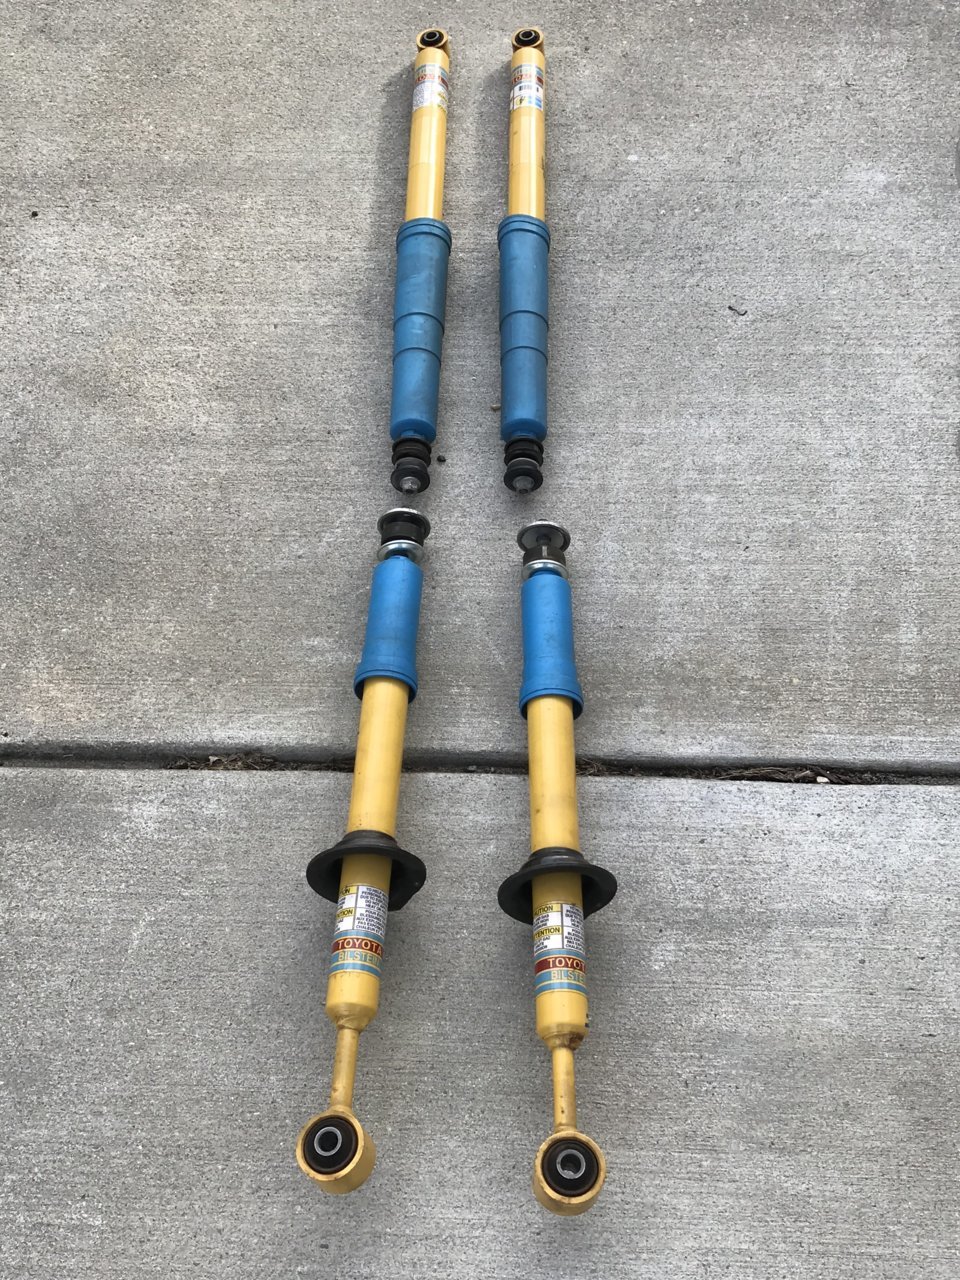 Sold*****TRD OFF-ROAD 3rd Gen. front and rear shocks | Tacoma World